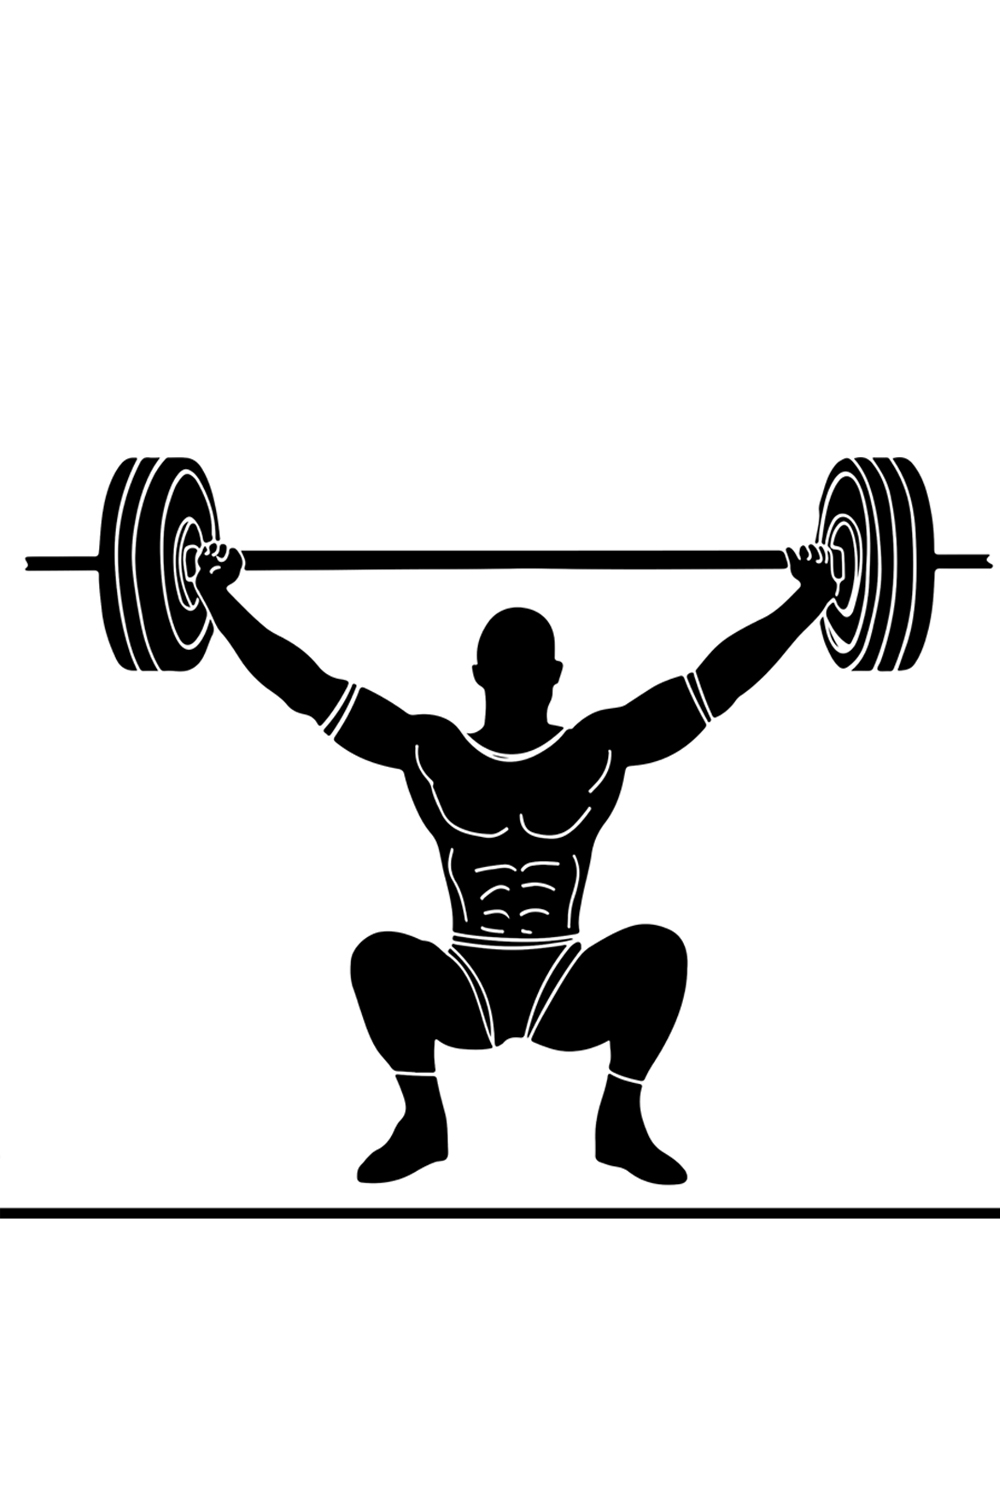 Monochrome Fitness: Weightlifter Silhouette and Barbell Drawing, Dynamic Strength: Silhouette of Weightlifter Lifting Barbell, Muscle Power: Weightlifter Silhouette with Big Barbell pinterest preview image.